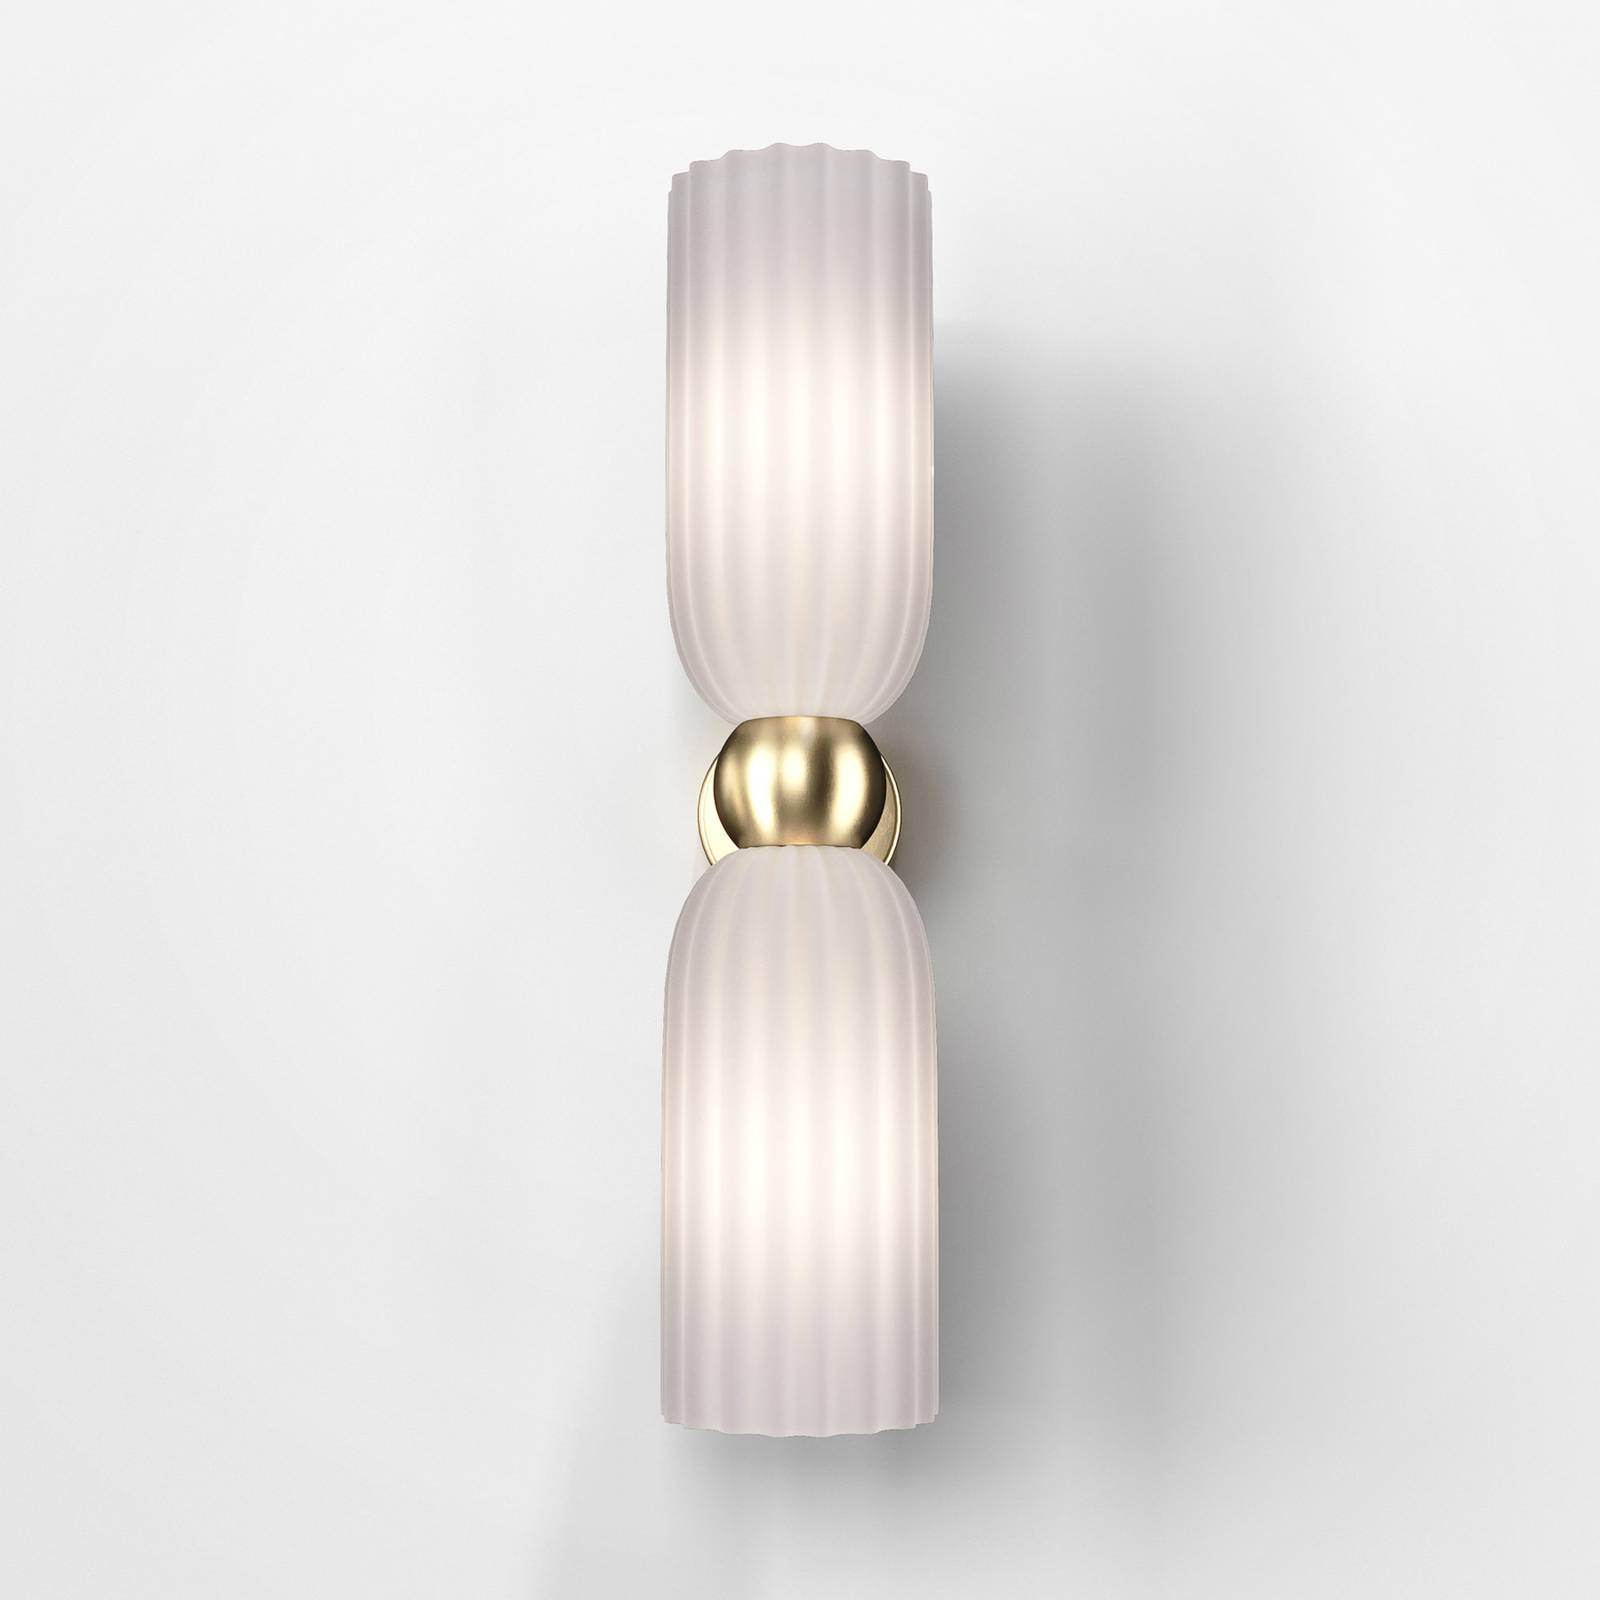 Photos - Chandelier / Lamp Maytoni Antic wall light up and down, white 